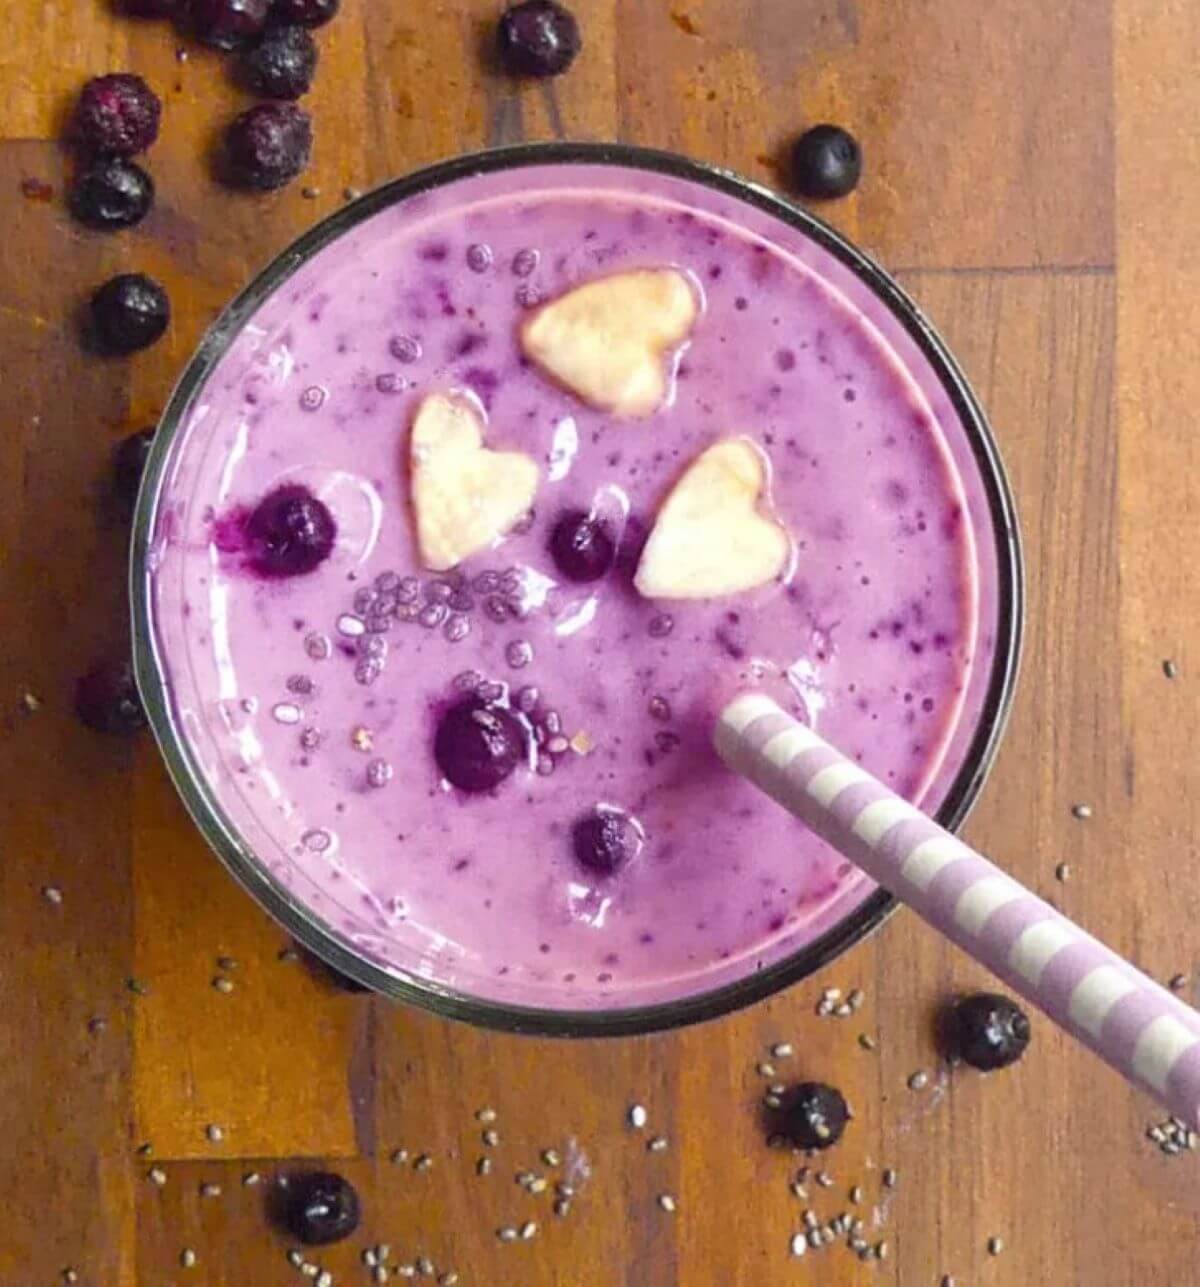 Purple smoothie with chia, blueberries and banana-shaped hearts on top. A purple straw inserted. 